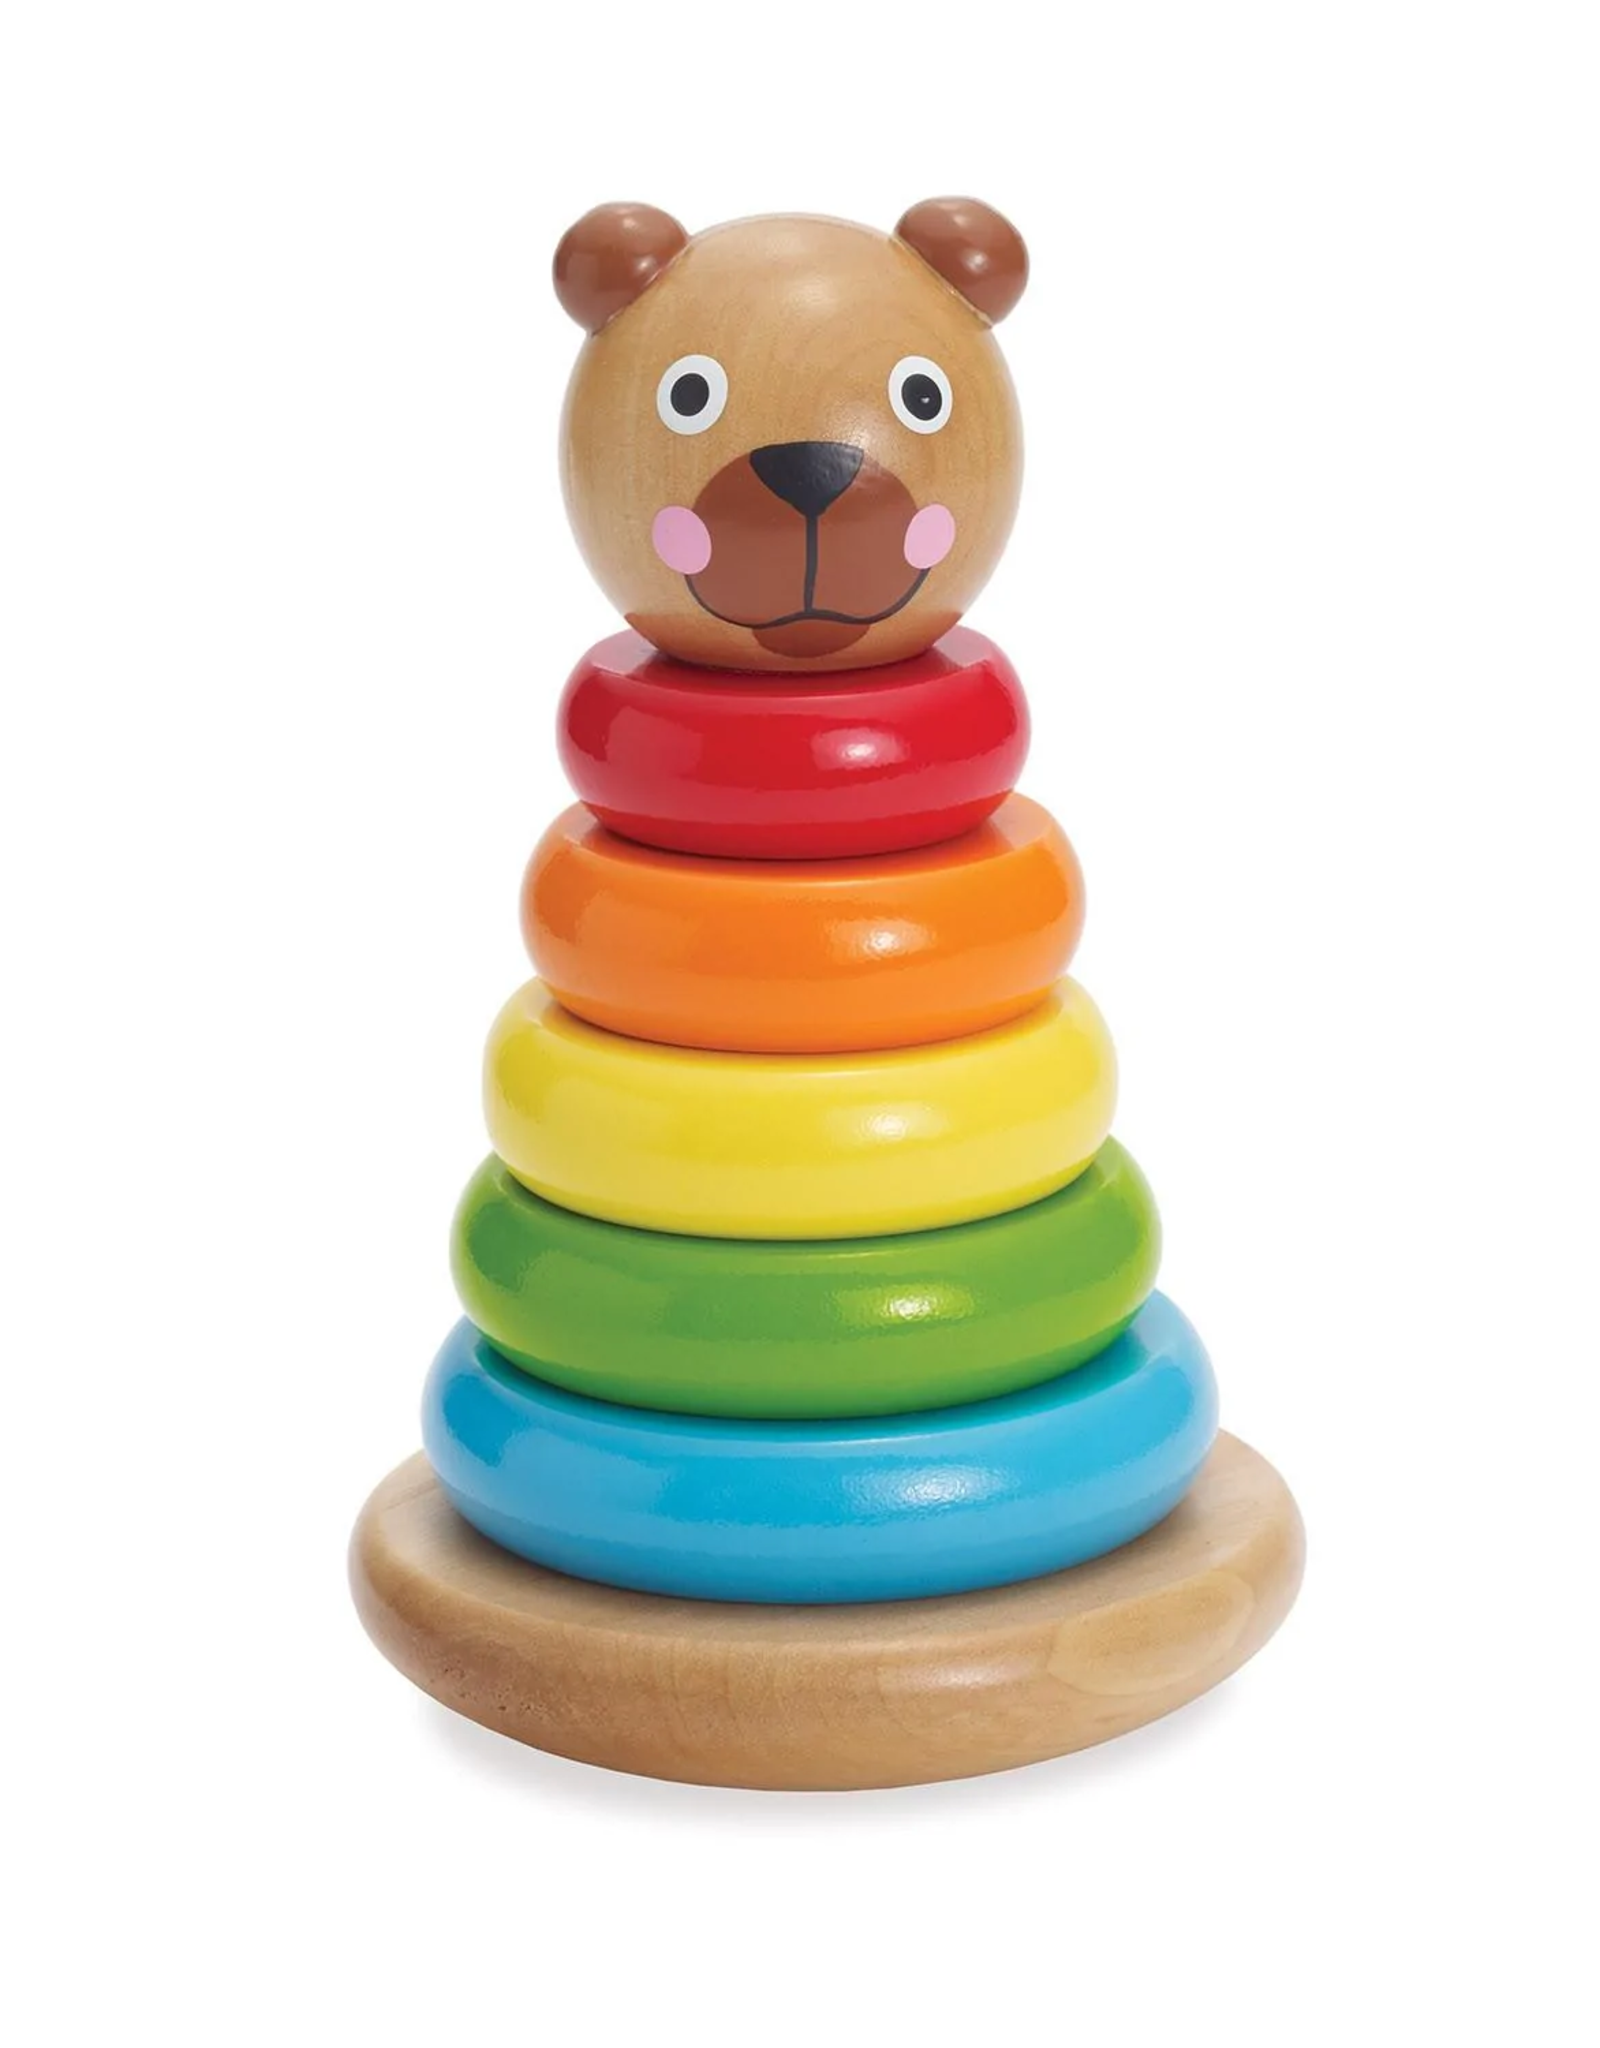 Manhattan Toy Brilliant Bear Magnetic Stack Up